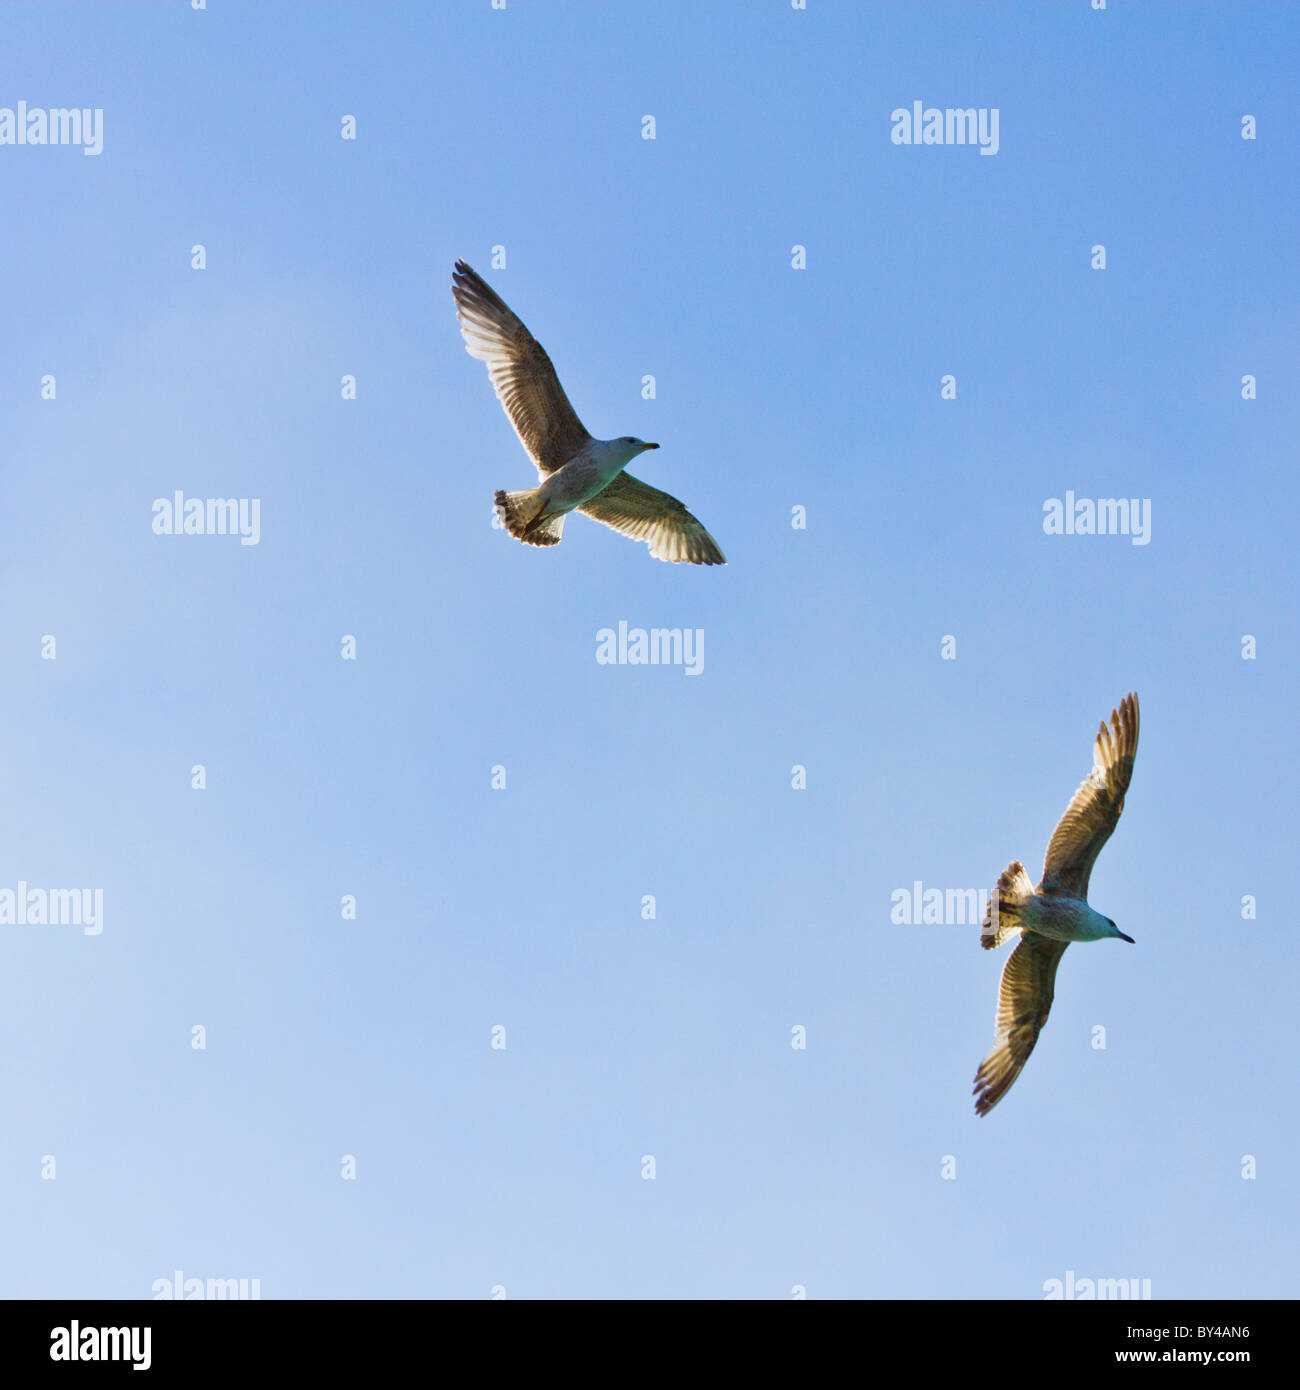 Two Seagulls with spread wings soaring. Stock Photo